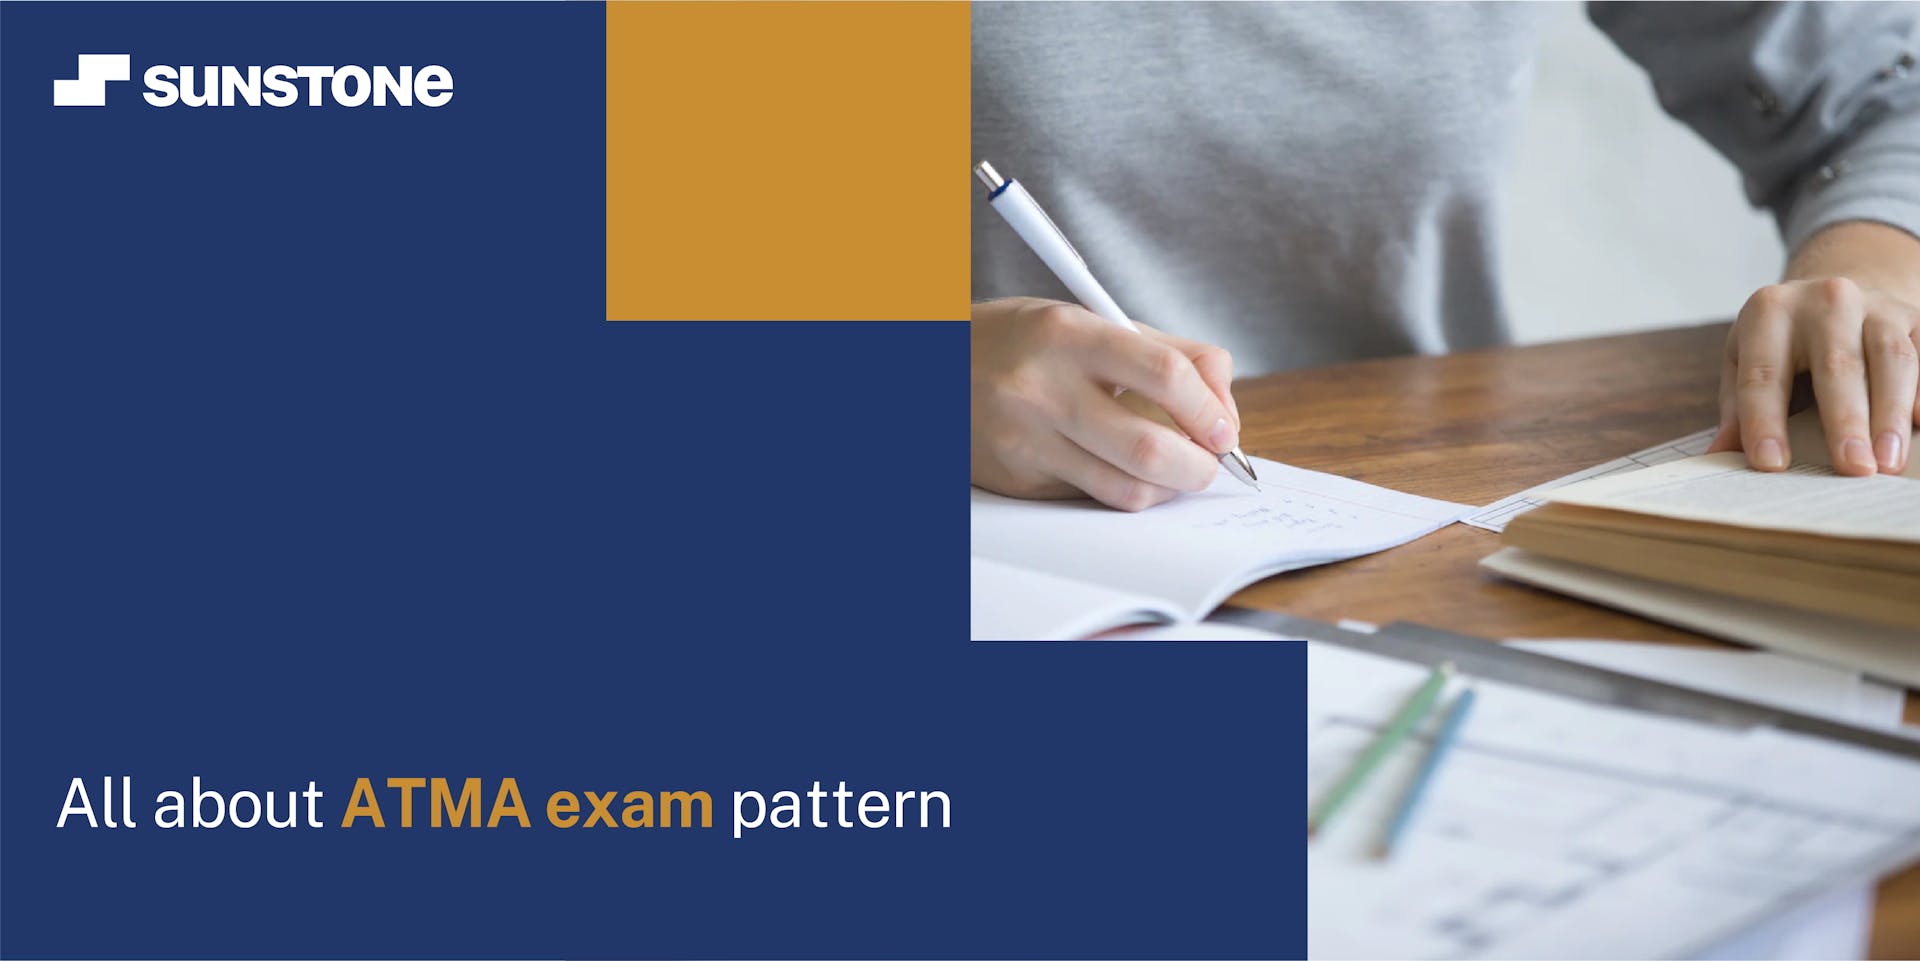 All about ATMA exam pattern